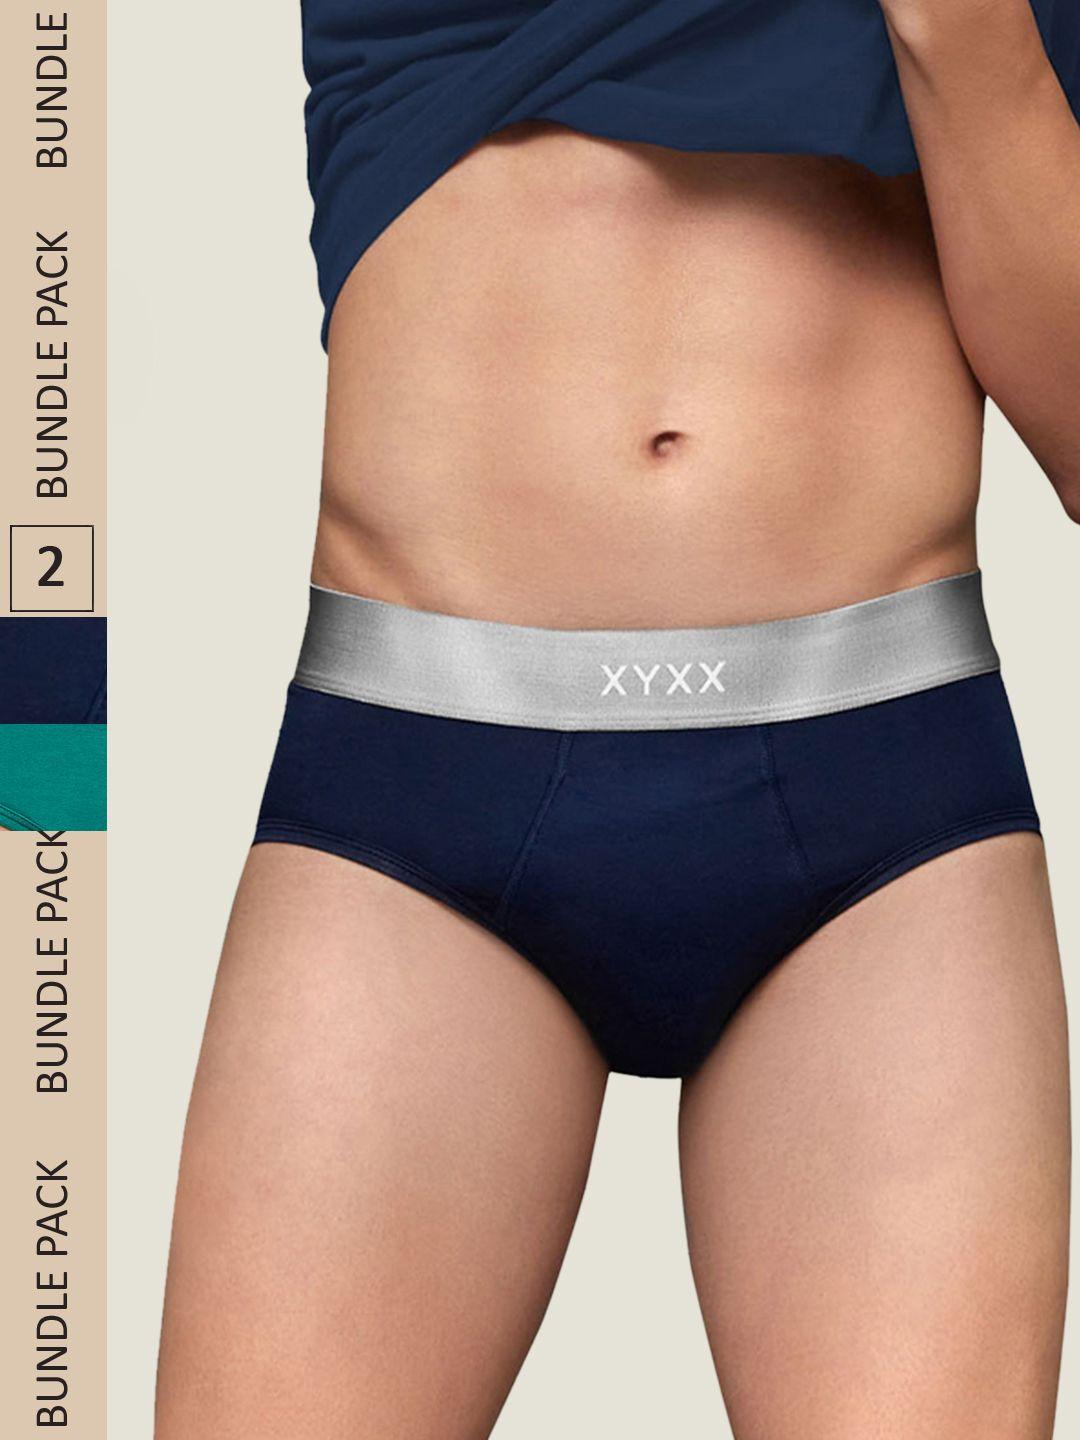 xyxx men intellisoft antimicrobial micro modal pack of 2 dualist briefs xybrf2pckn284